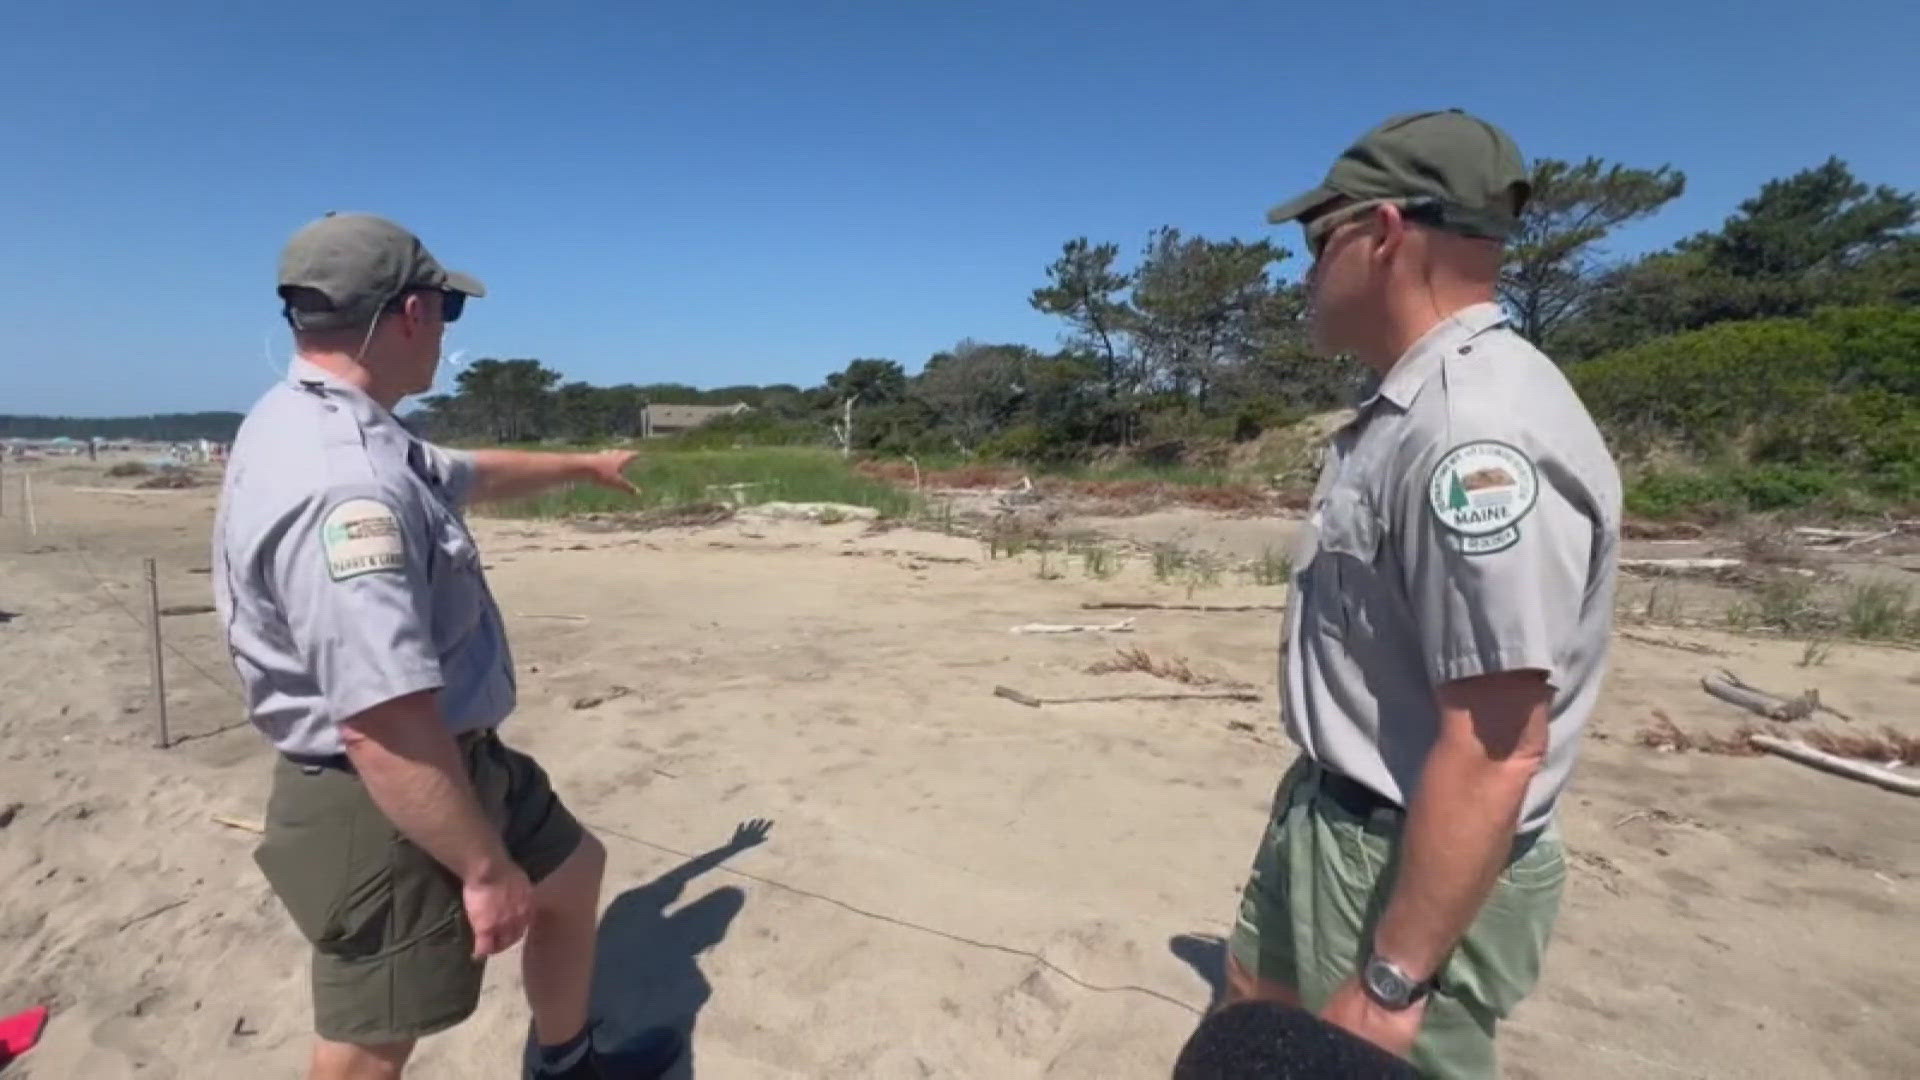 The beach in Phippsburg lost about 10 feet of its sand dunes during the powerful winter storms. Now the community is looking for an ecofriendly way to restore them.